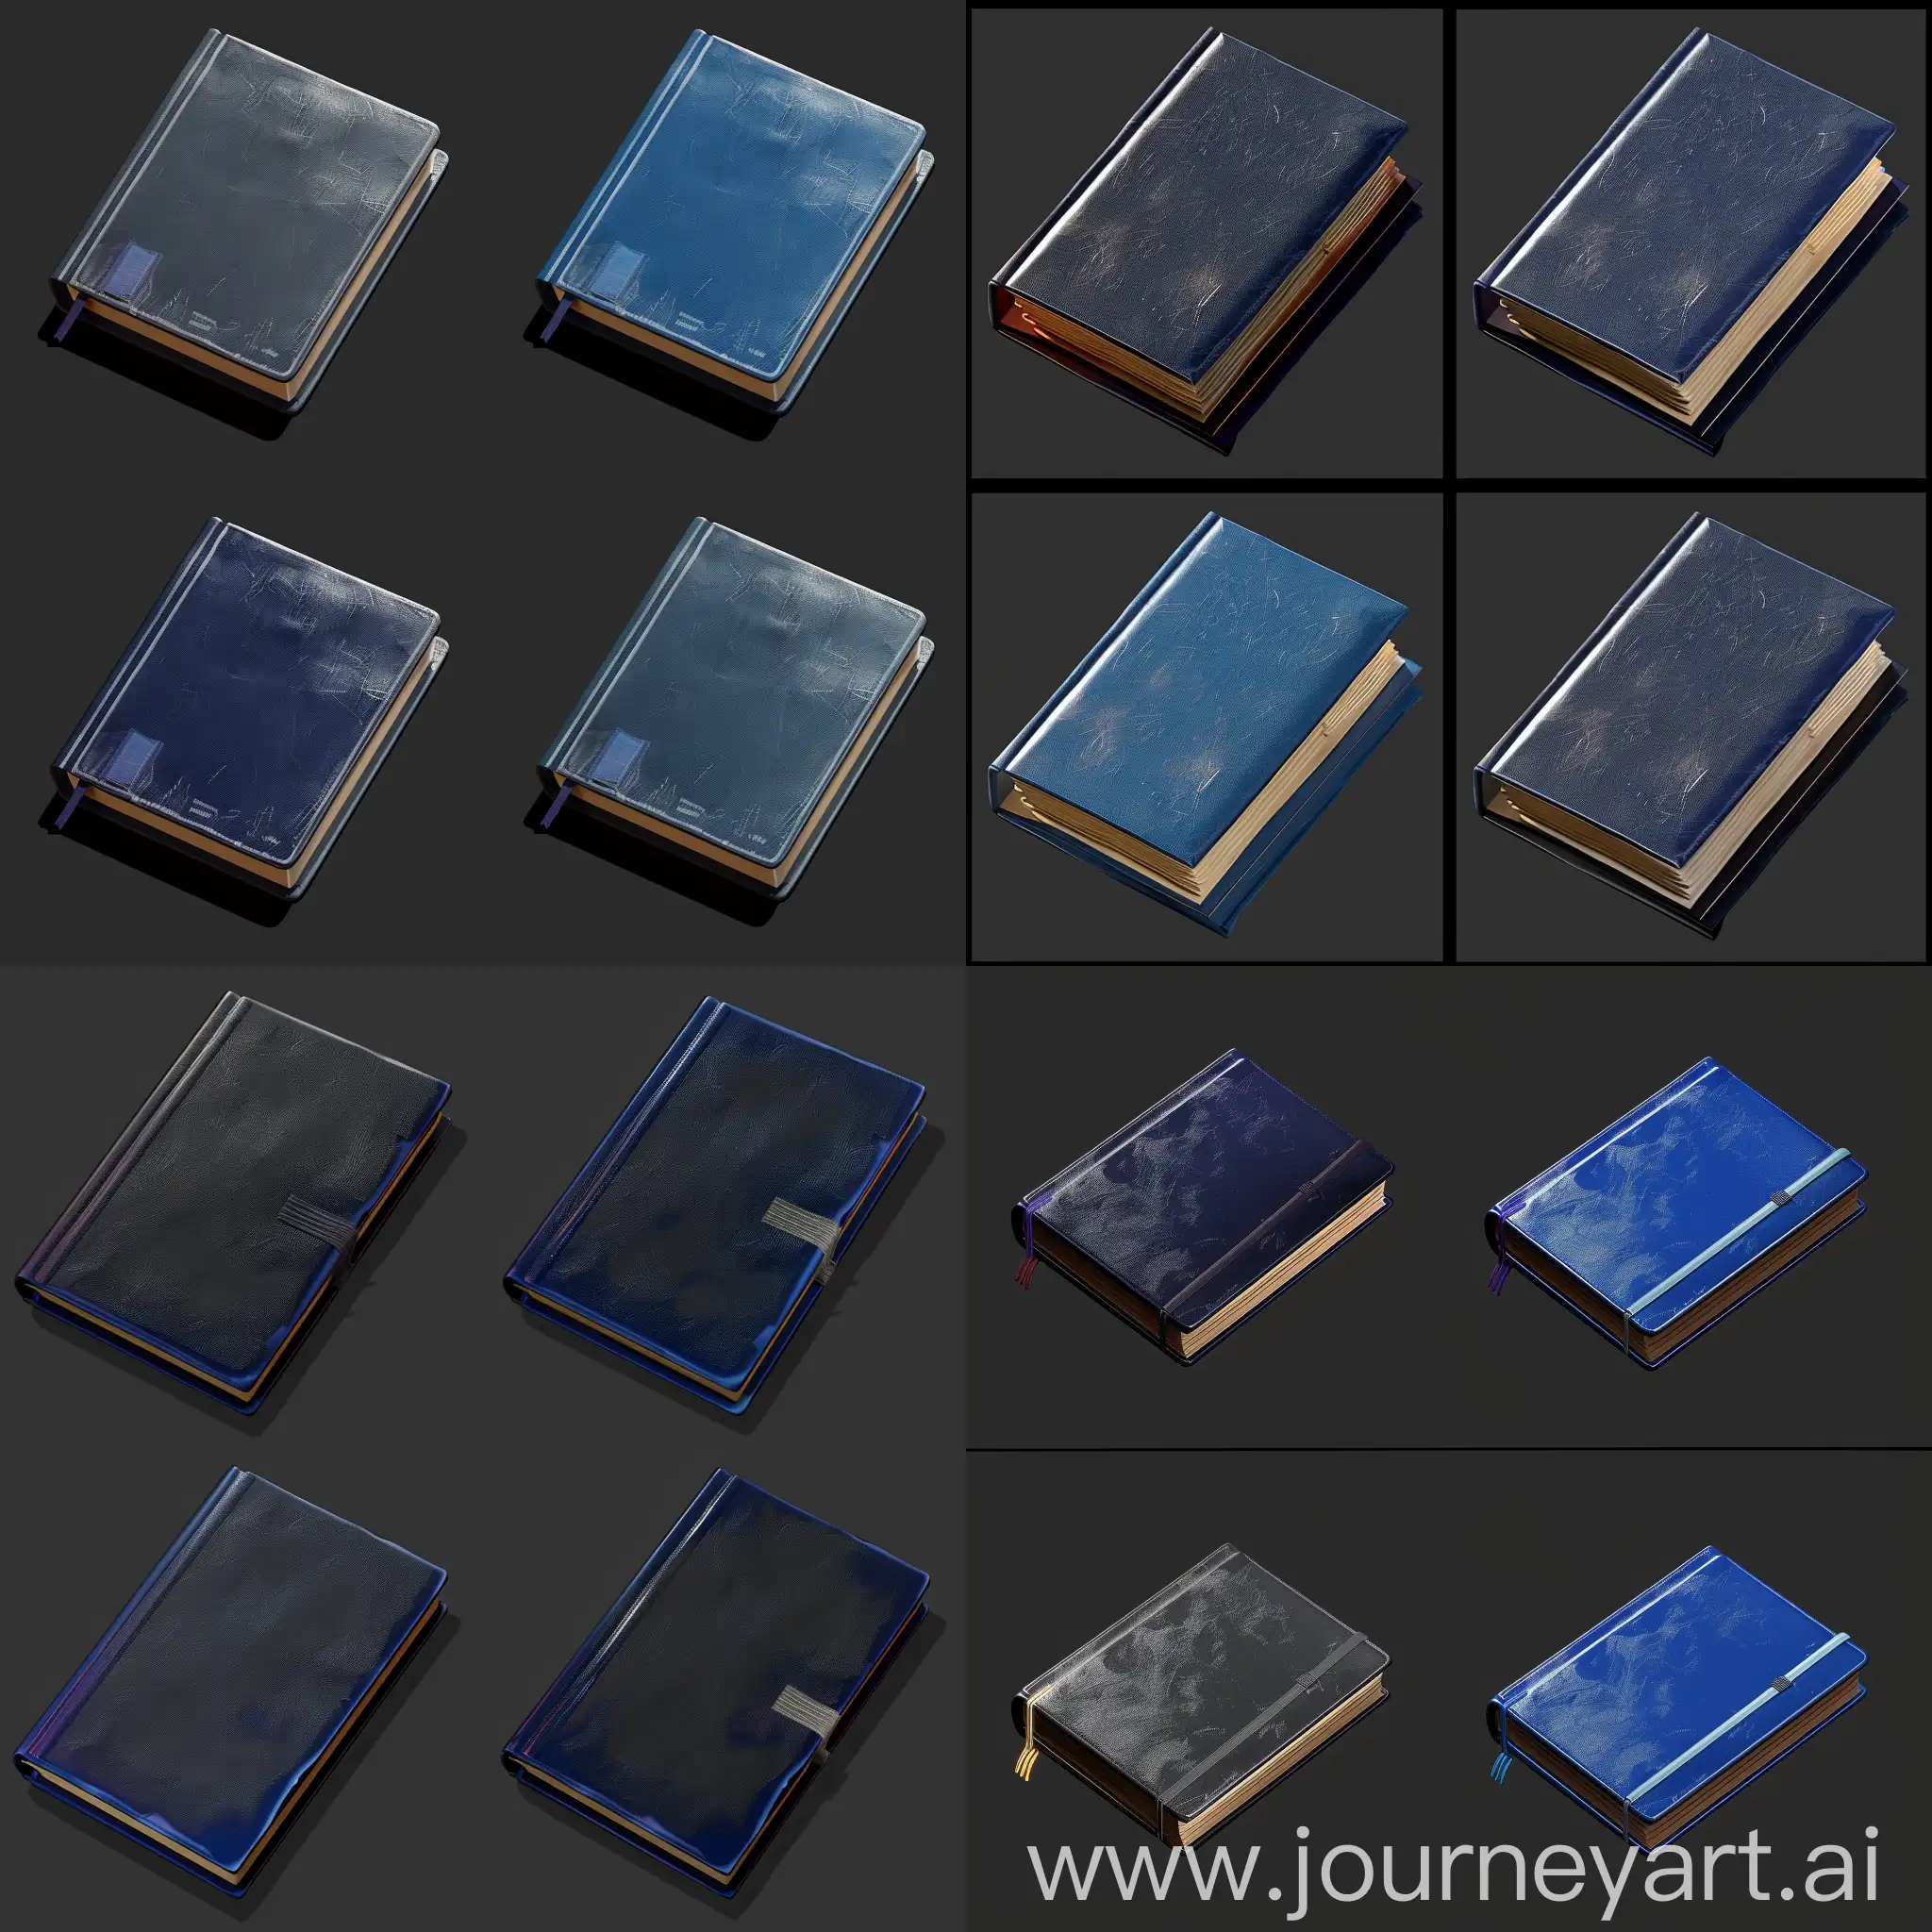 UltraRealistic-Isometric-Blue-Journals-on-Black-Background